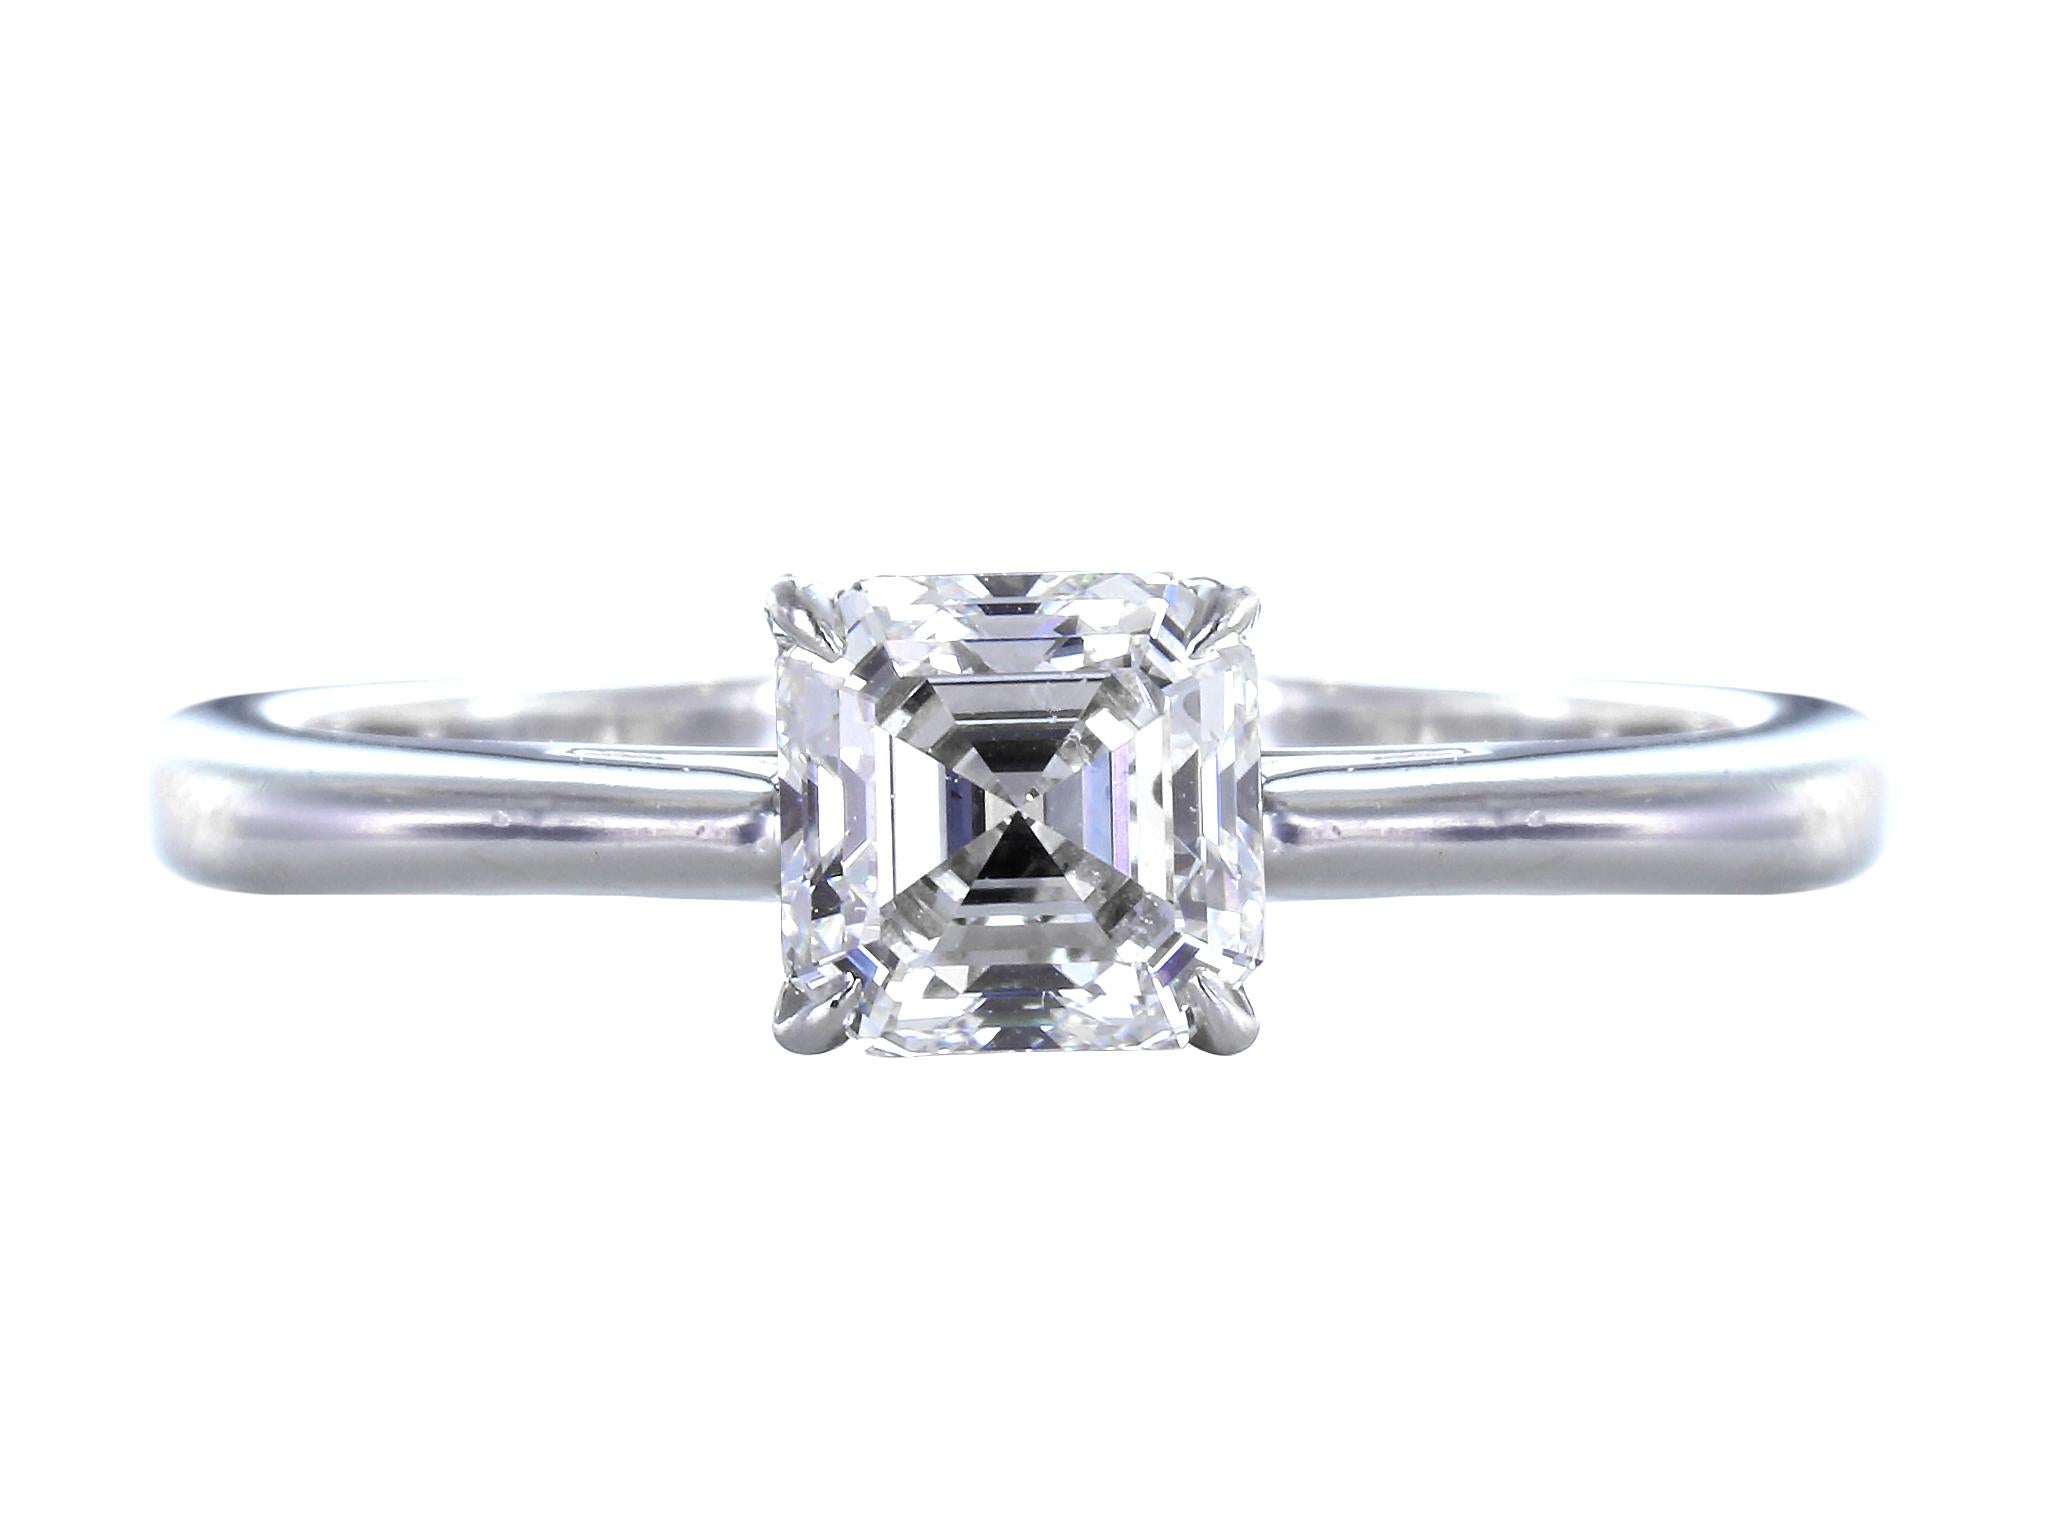 Platinum solitaire engagement ring consisting of 1 Asscher cut diamond weighing .81 carats, measuring 5.18 x 5.14 x 3.51 mm, color and clarity of F/VS2 with GIA report 12559987 also inscribed in the girdle.